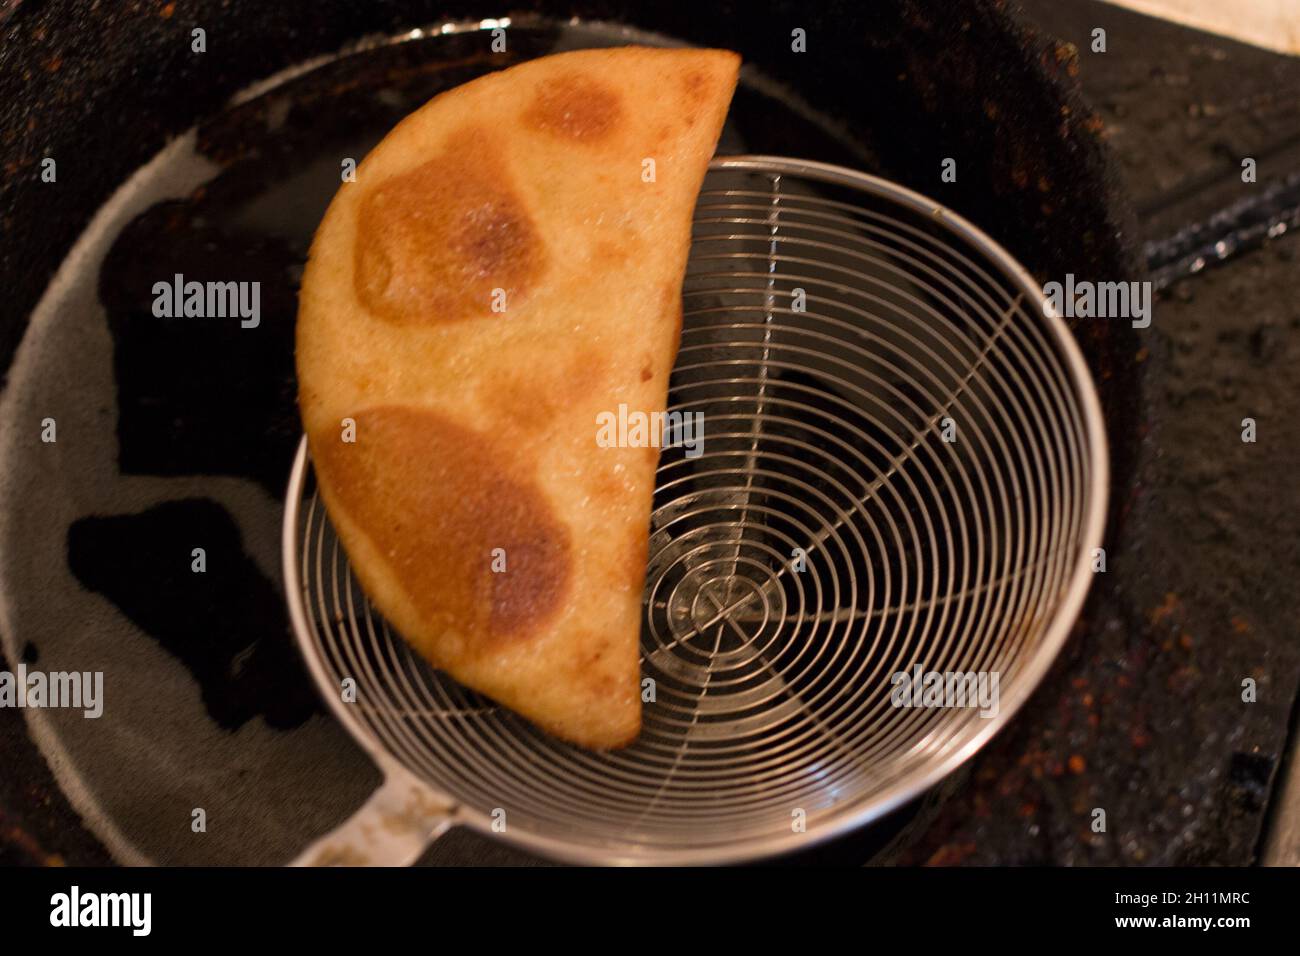 Closeup of newly cooked empanada scooped out from a pot and drained Stock Photo